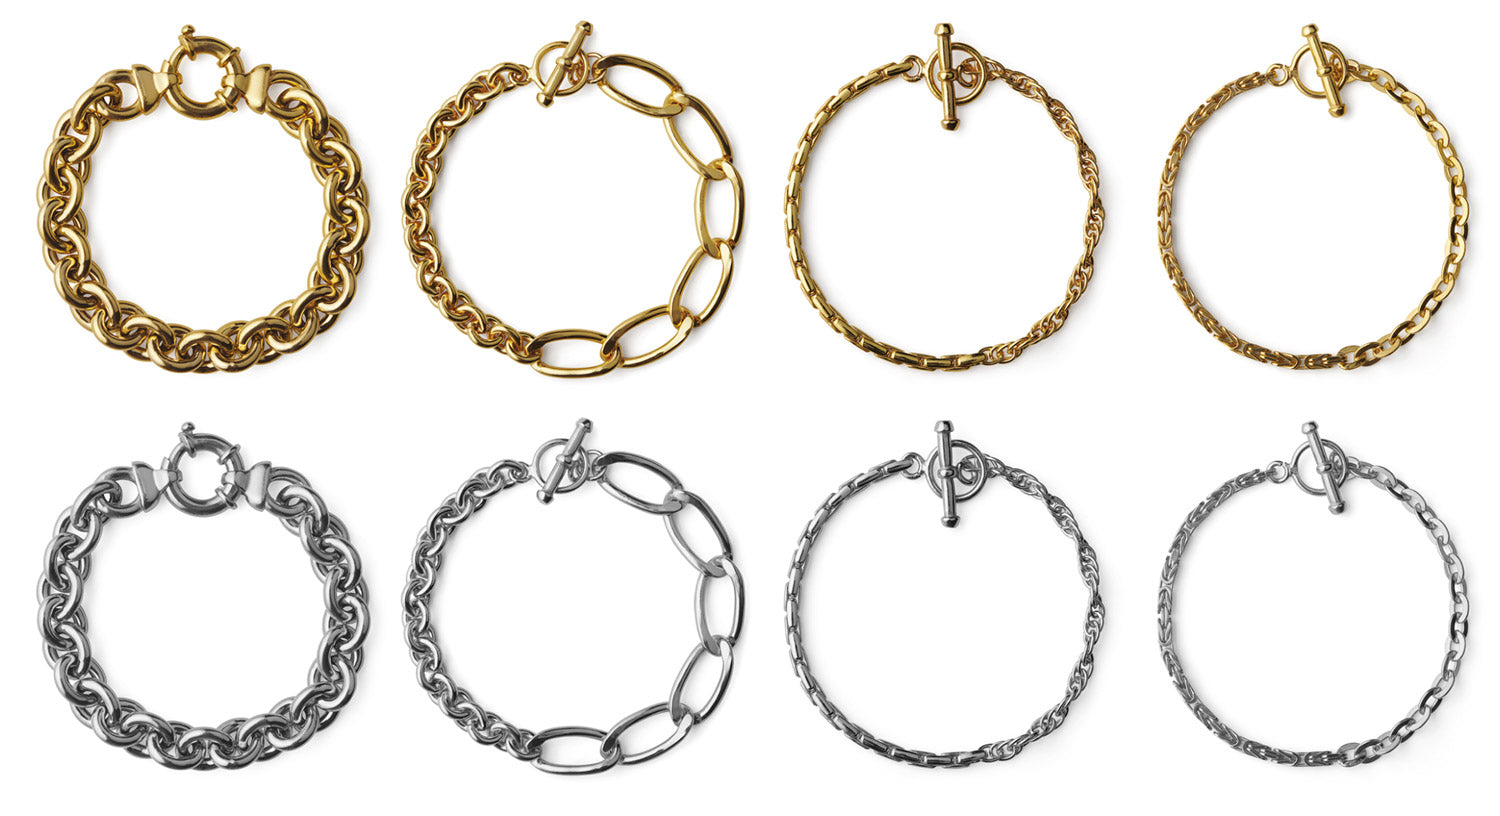 Alice Made This | Chain Collection | Designer Bracelets